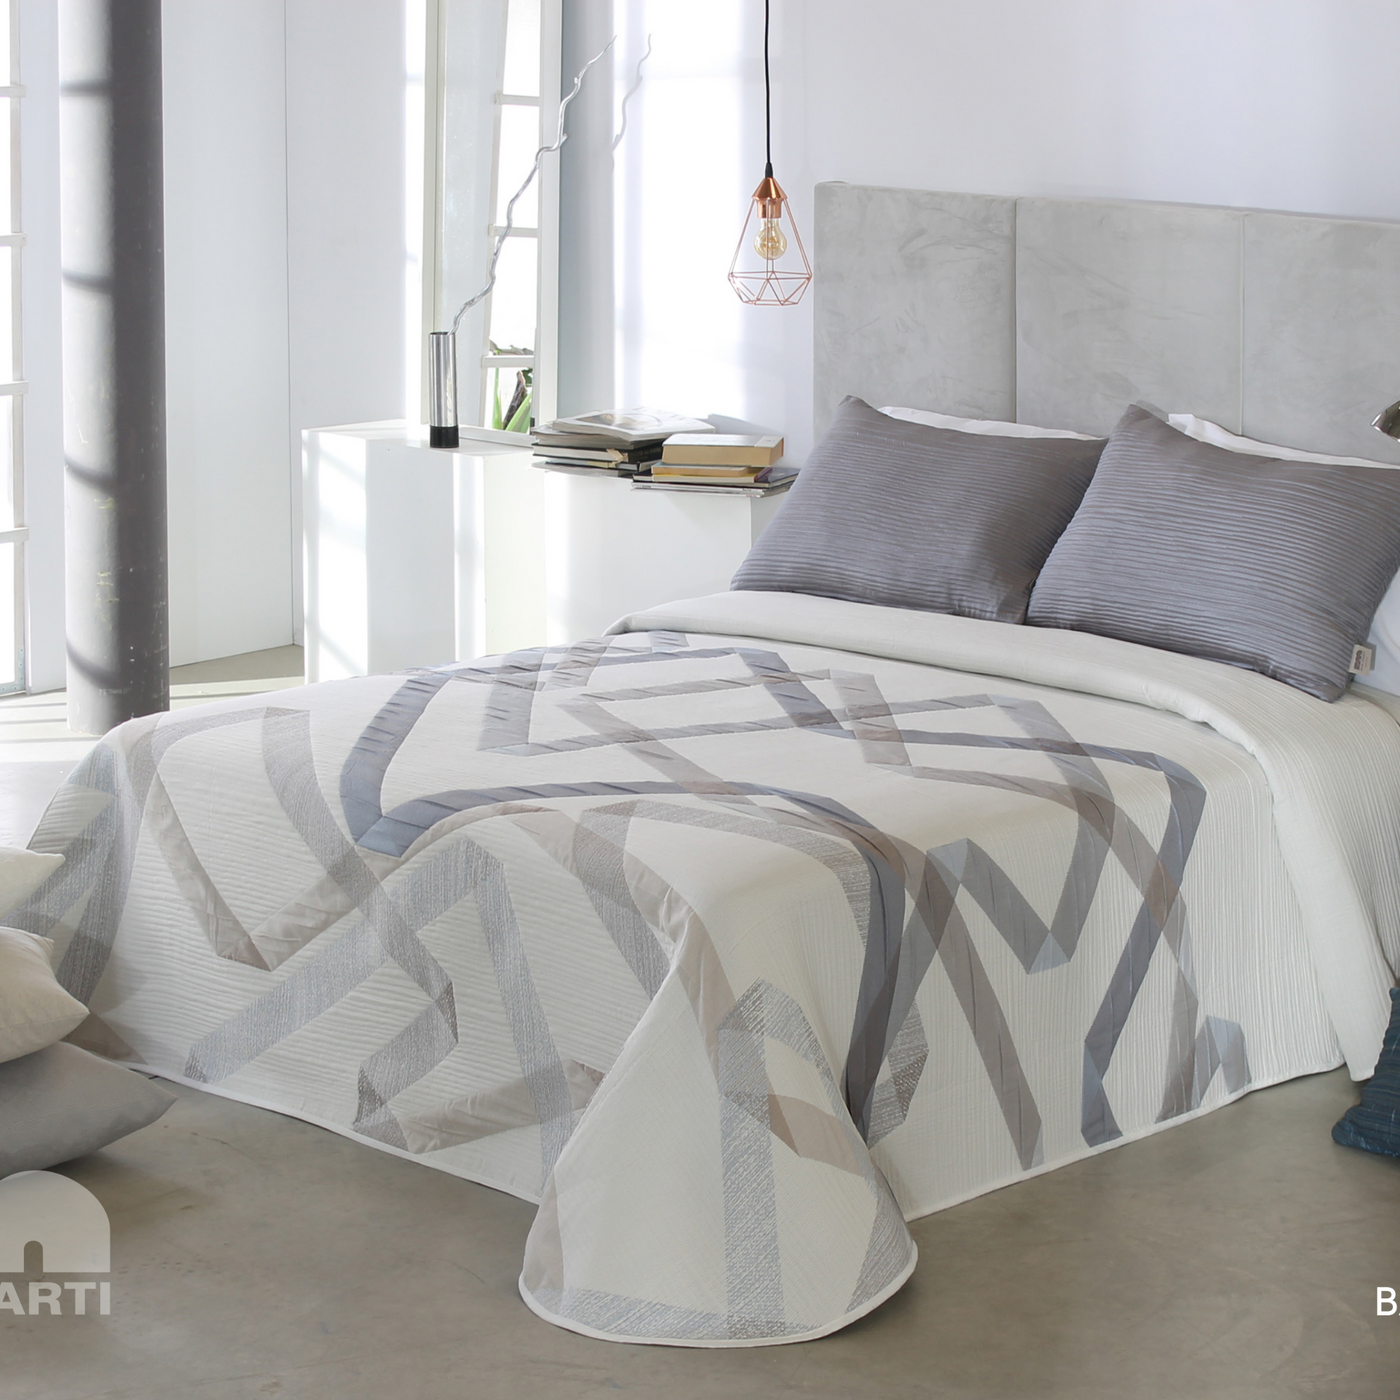 High End Fluffy Jacquard Bedspread - From Reig Marti Spain